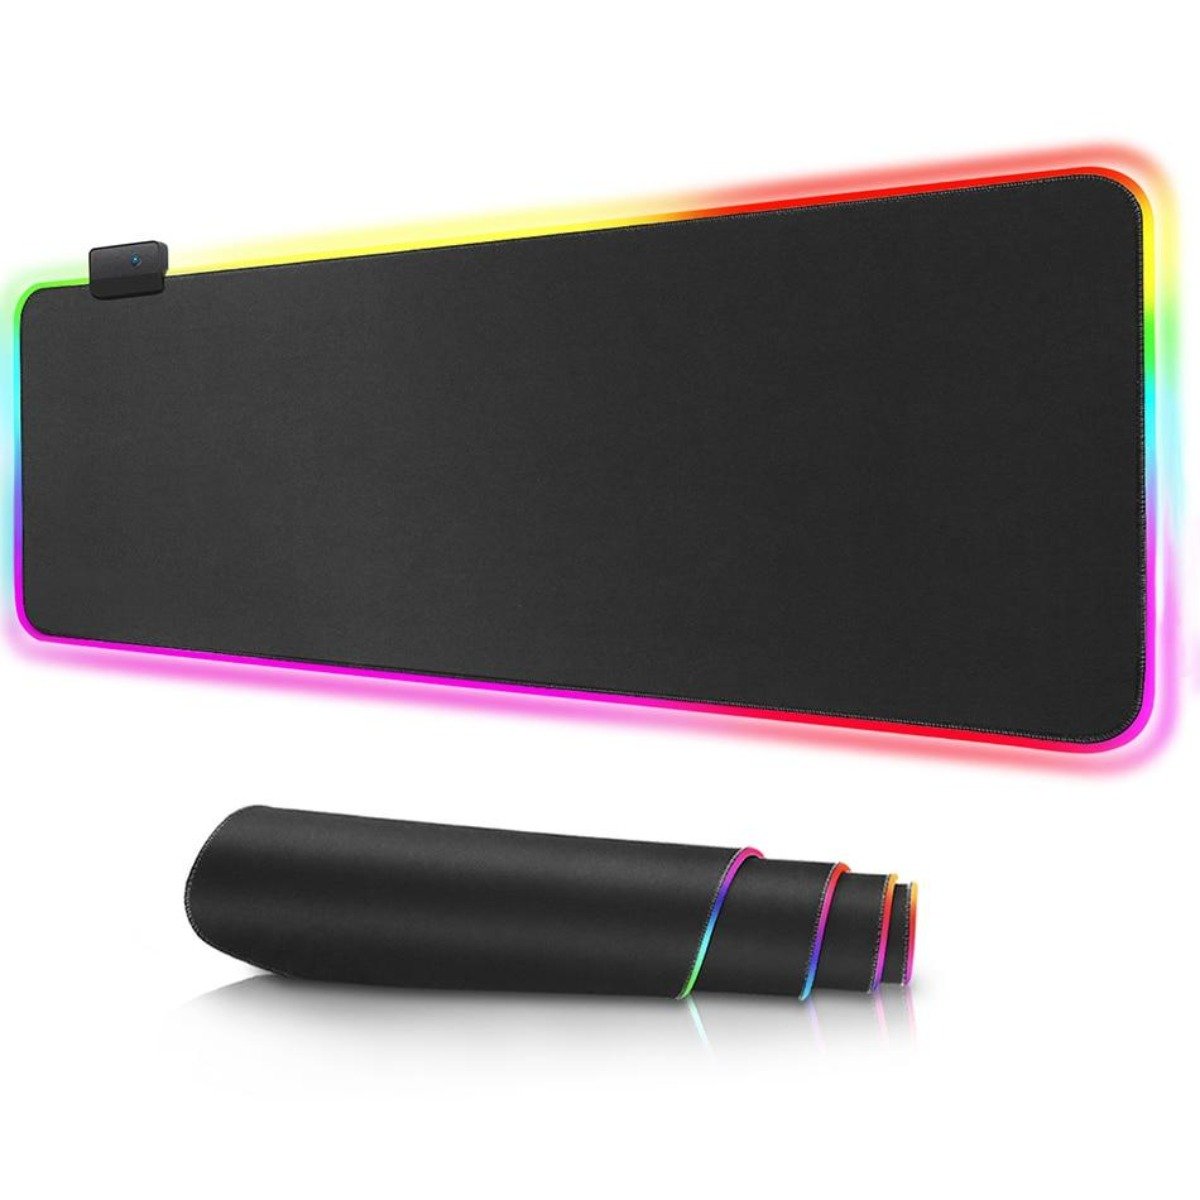 HYRSLF RGB Workspace Mouse Pad - Large